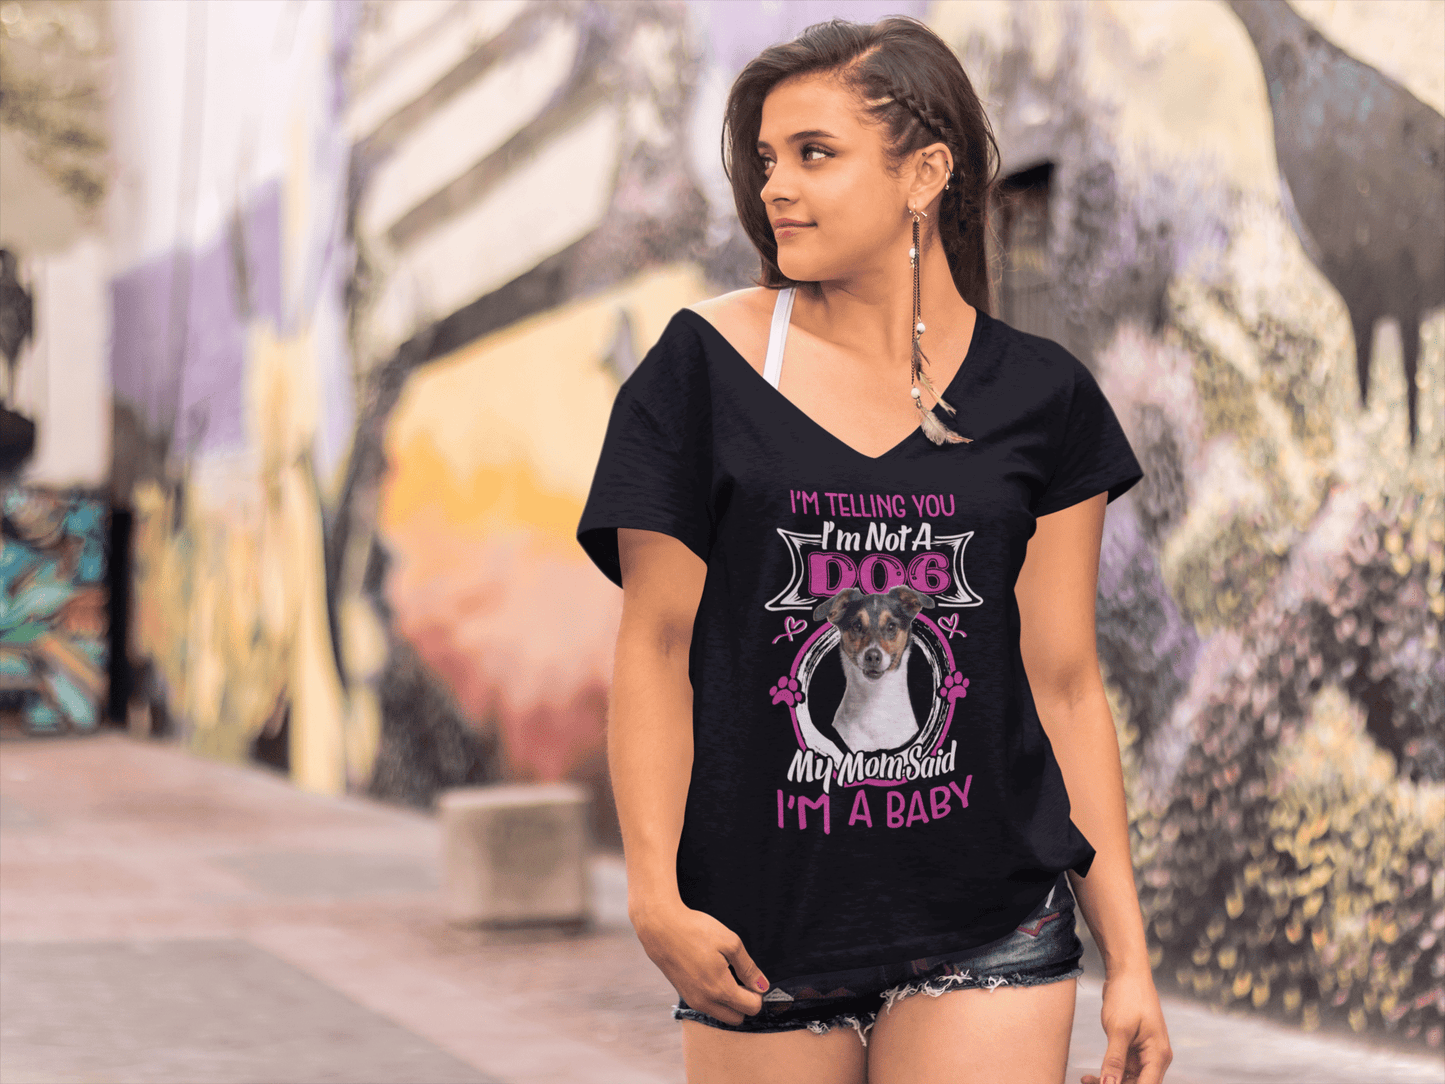 ULTRABASIC Women's T-Shirt I'm Telling You I'm Not a Jack Russel Terrier - My Mom Said I'm a Baby - Cute Puppy Dog Lover Tee Shirt